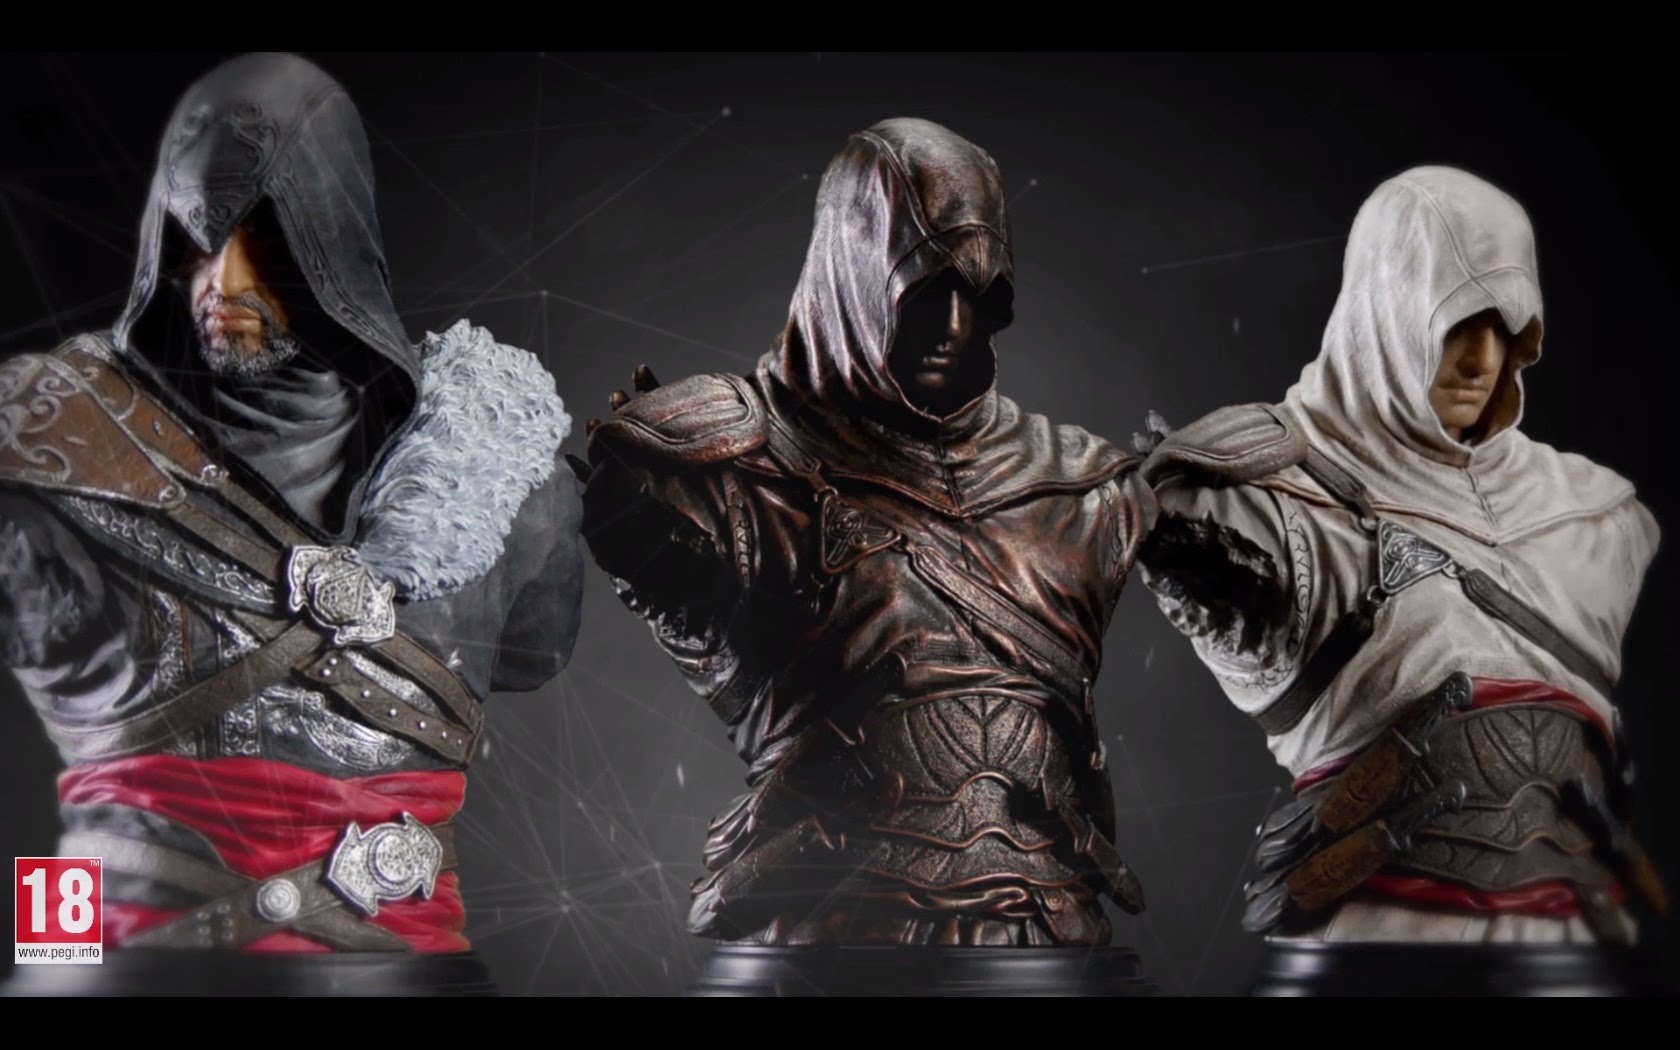 Assassin's Creed busts: Altair & Ezio trailer